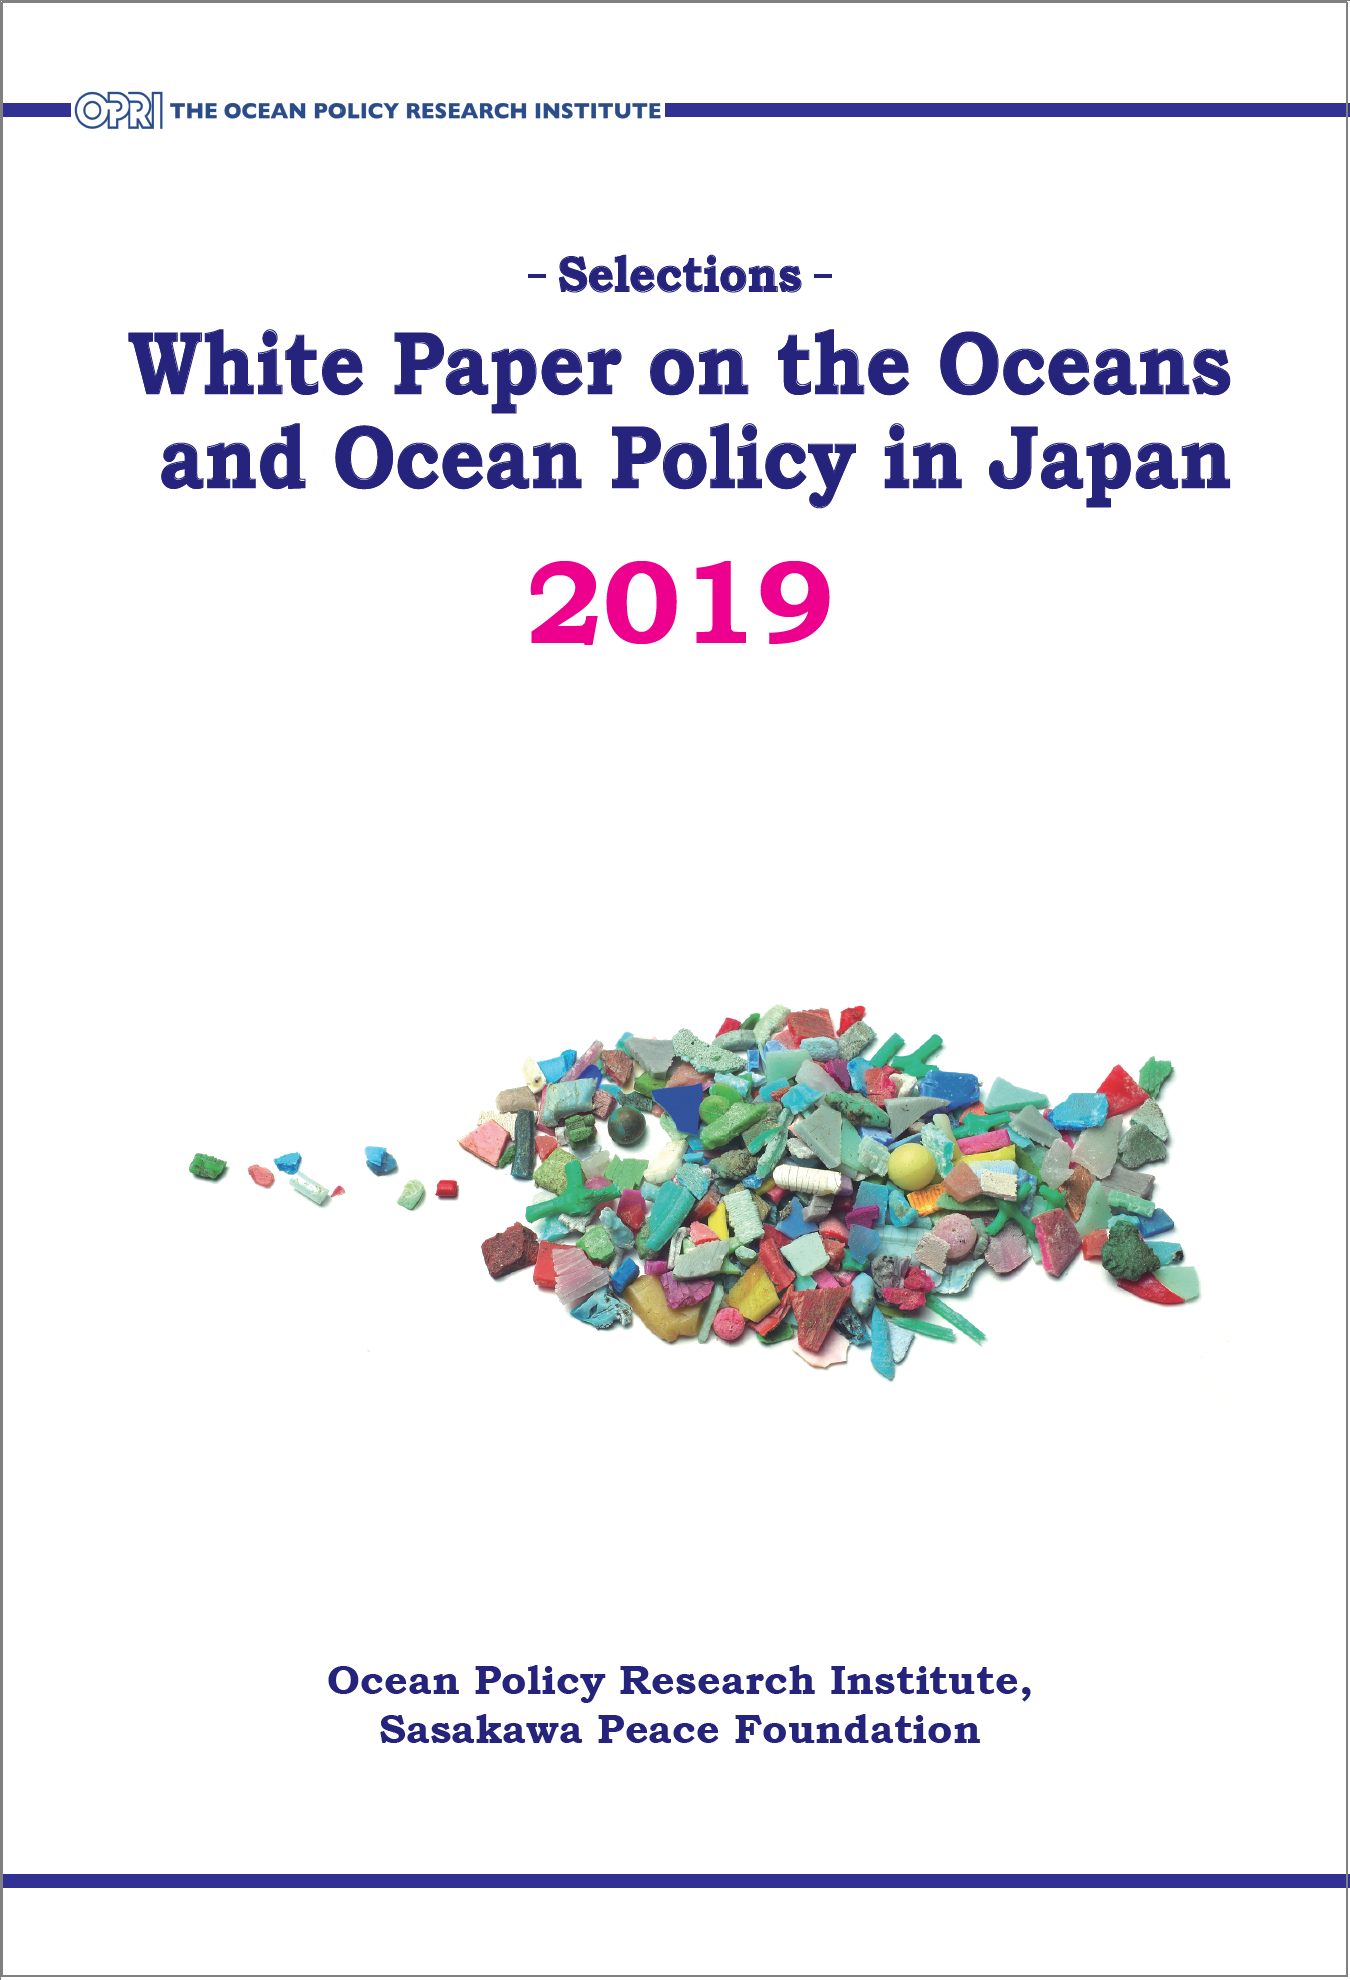 White Paper on the Oceans and Ocean Policy in Japan 2019